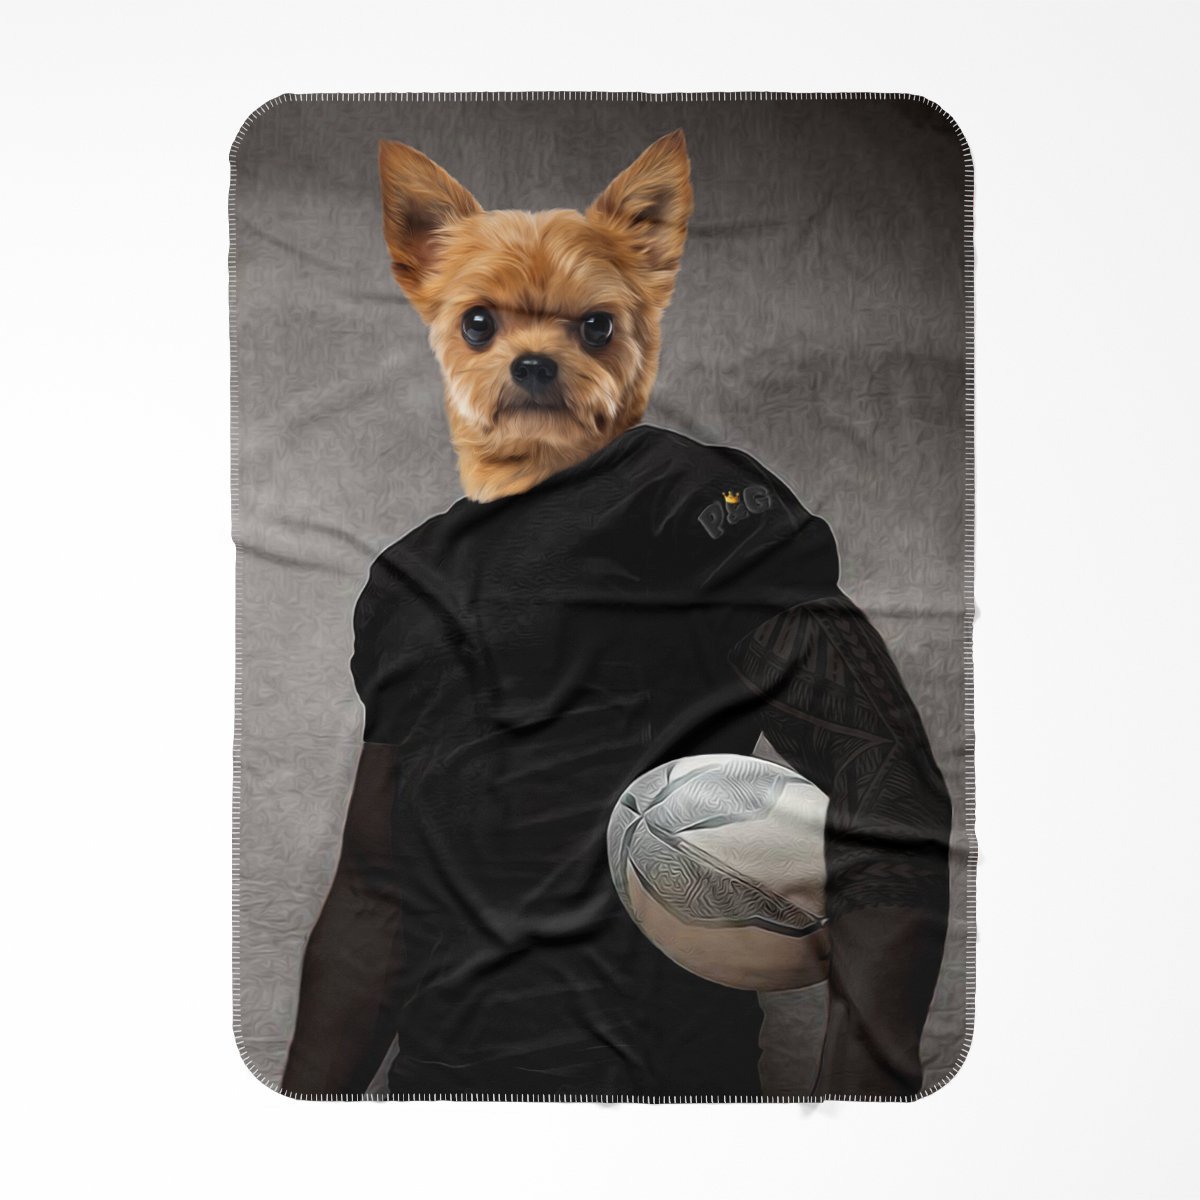 The Rugby Player: Custom Pet Blanket - Paw & Glory - #pet portraits# - #dog portraits# - #pet portraits uk#Paw and glory, Pet portraits blanket,print your pet blanket, custom blanket of your pet, pet custom blanket, get your pet printed on a blanket, pet blanket print